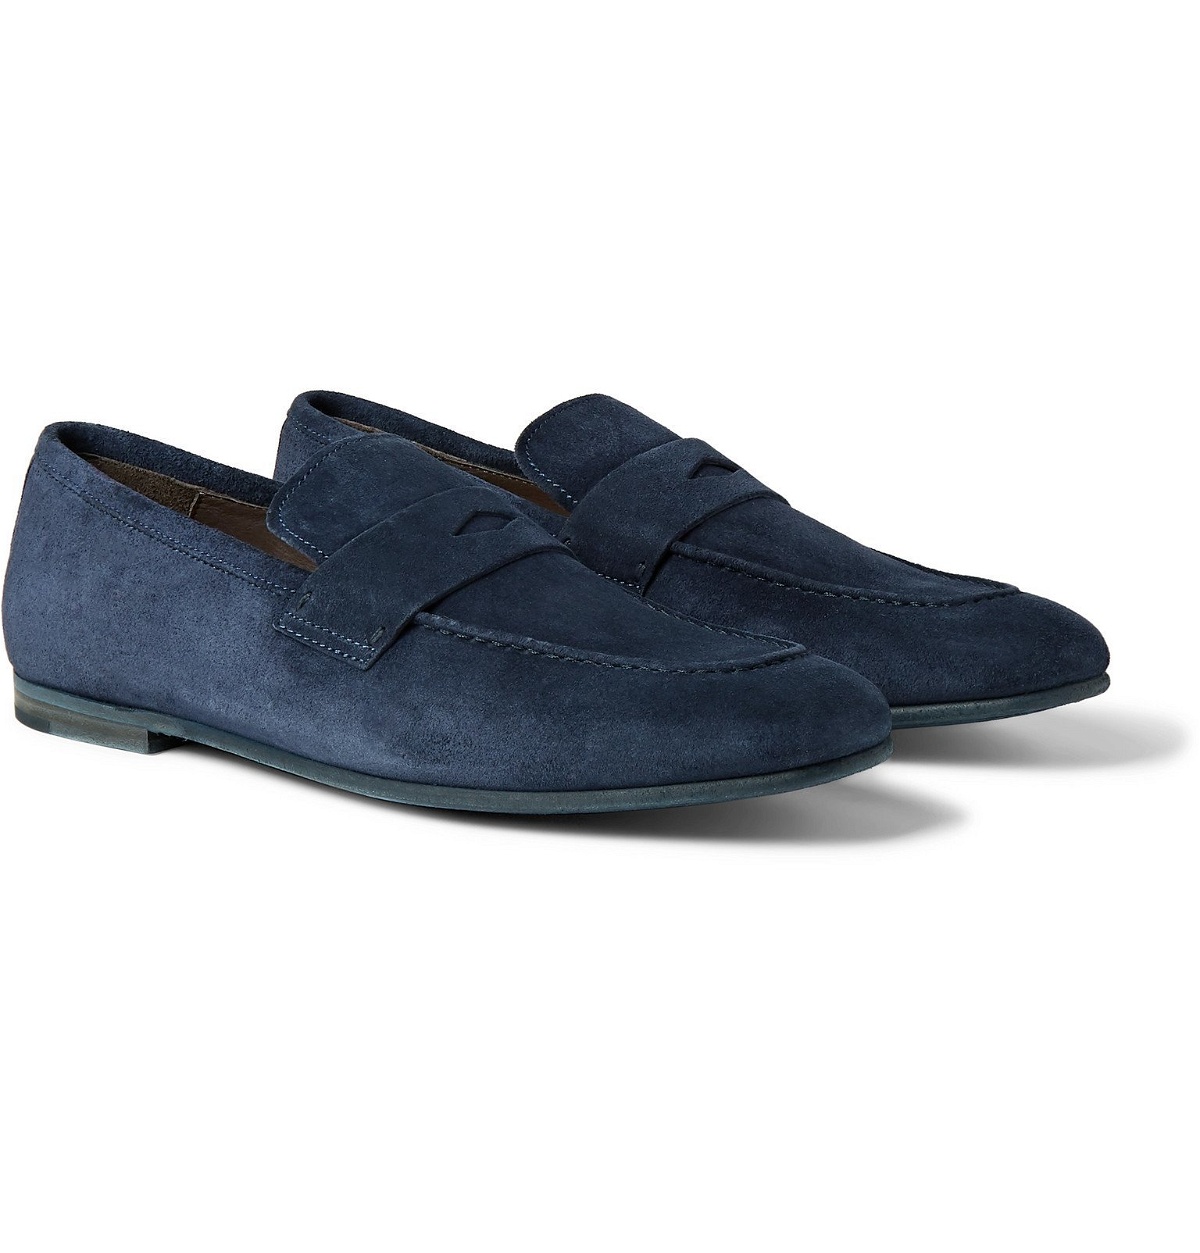 Dunhill - Chiltern Suede Penny Loafers - Blue Dunhill